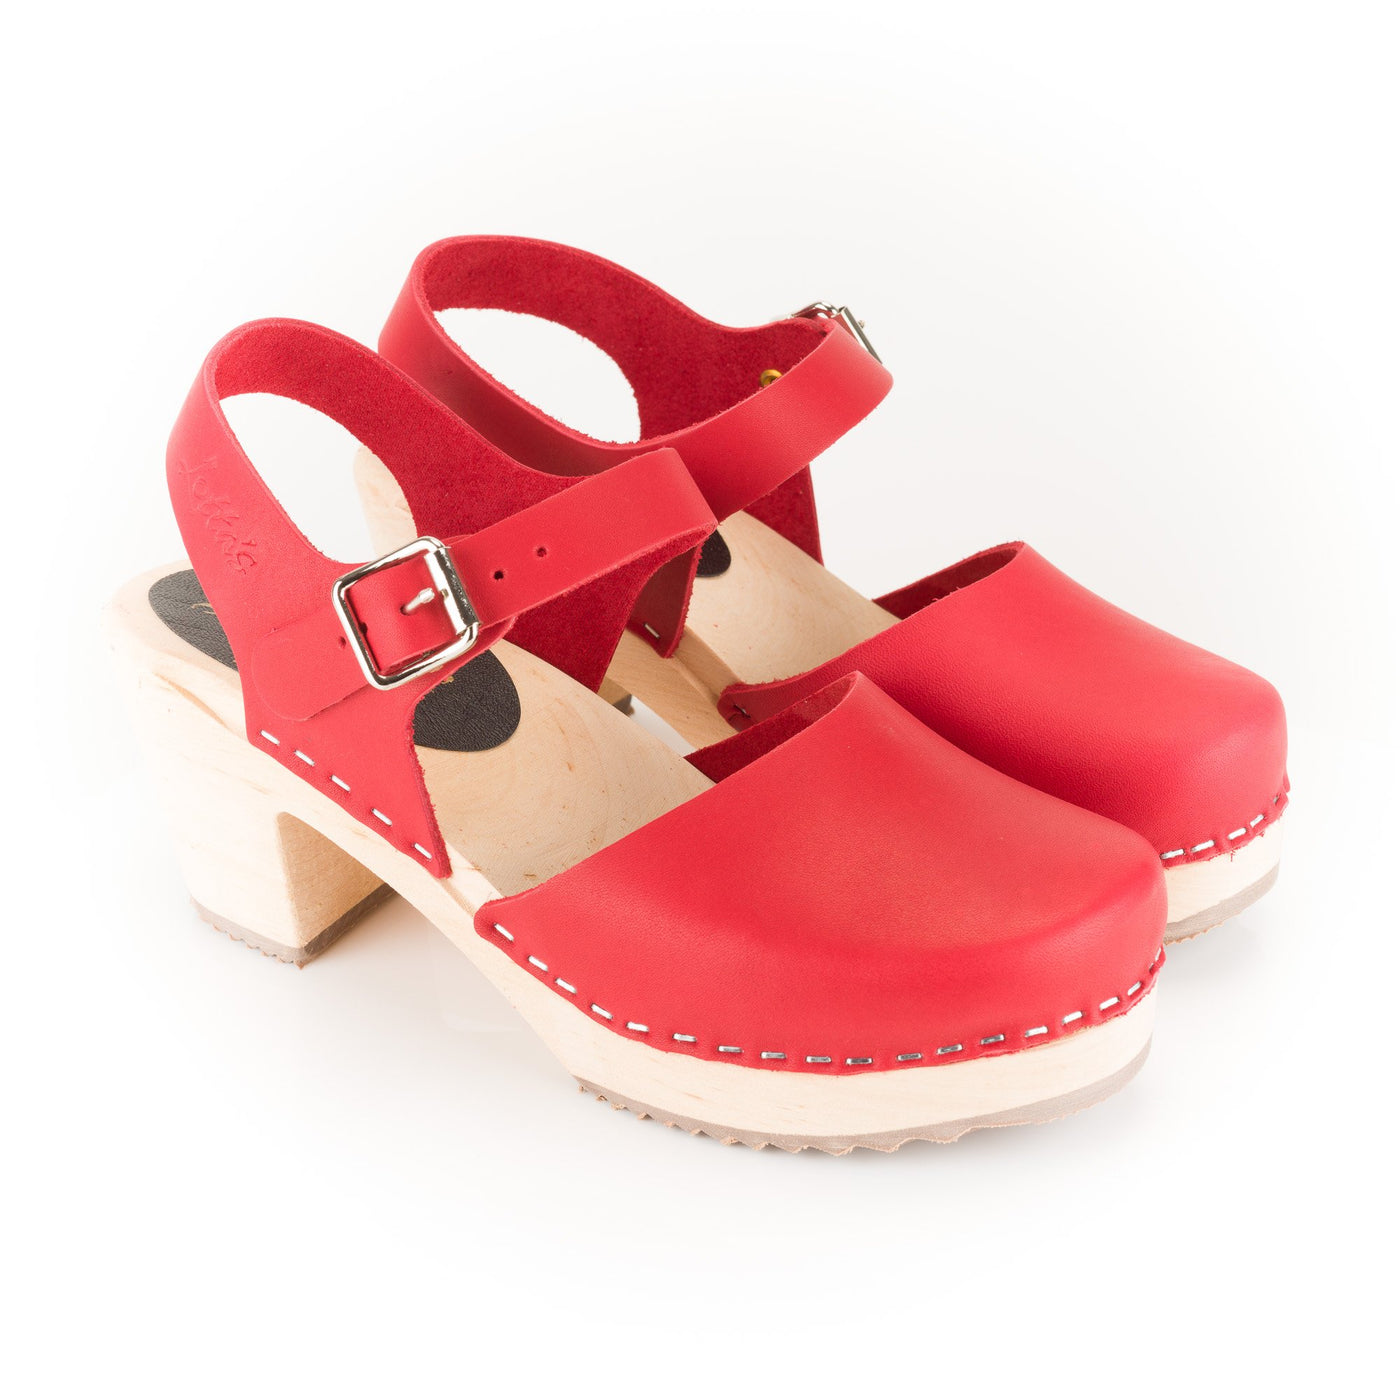 Red Wooden Clogs | Covered Toe Clogs 